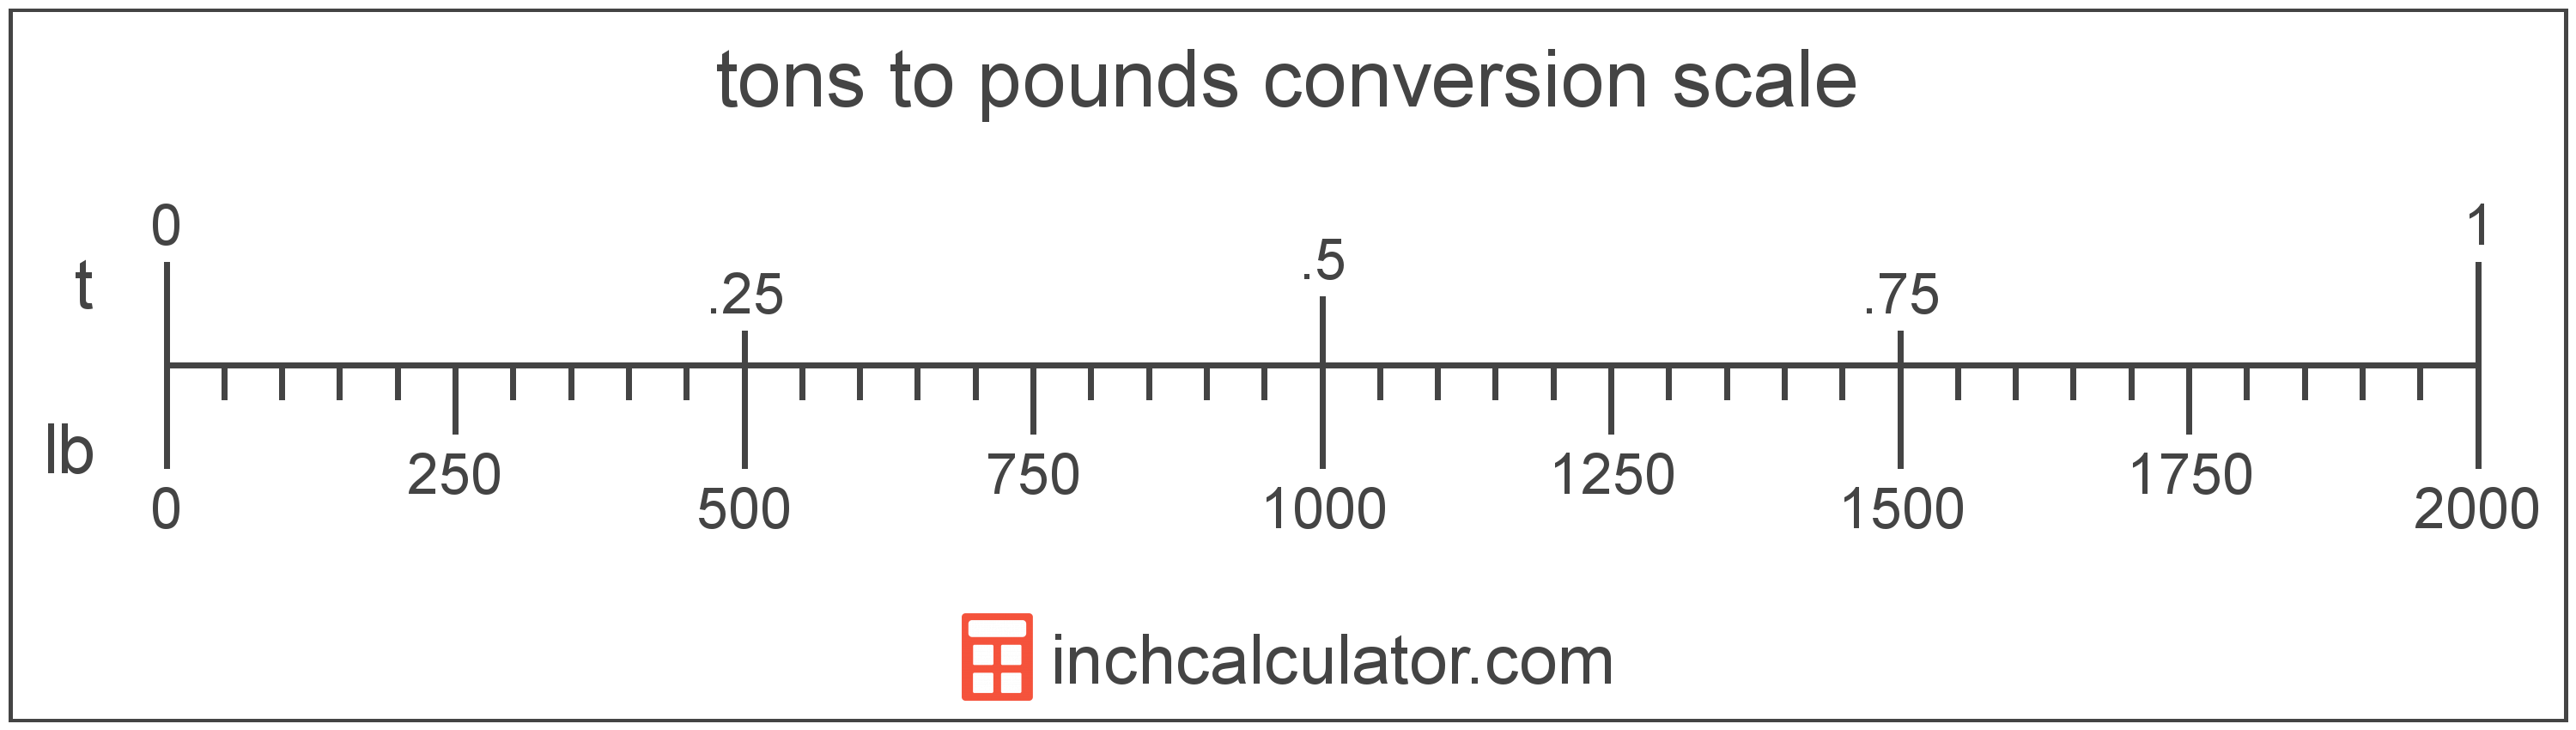 conversion scale showing tons and equivalent pounds weight values